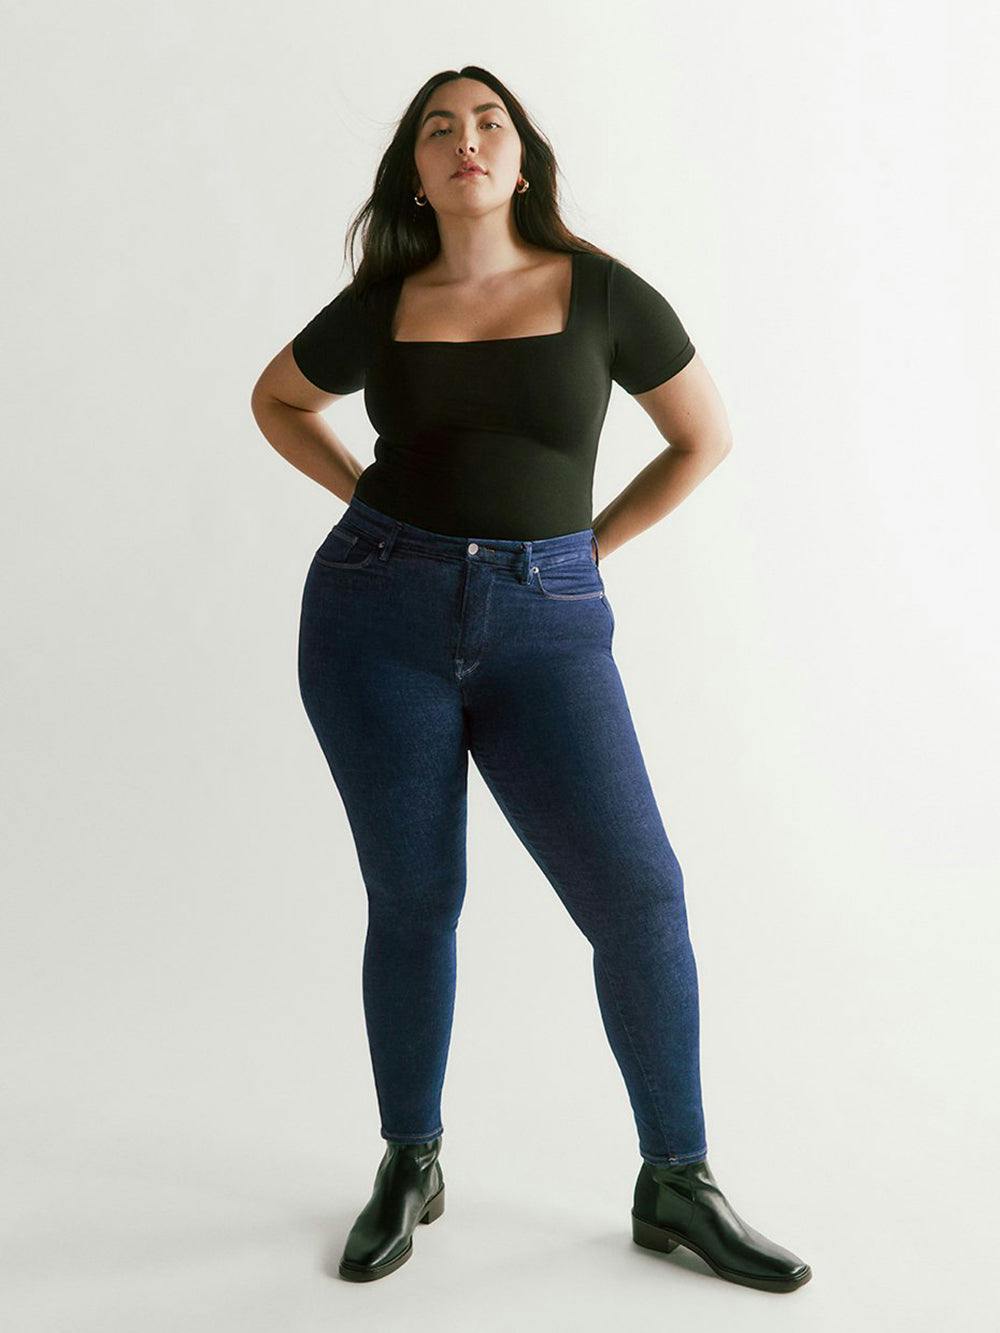 jeans full body view